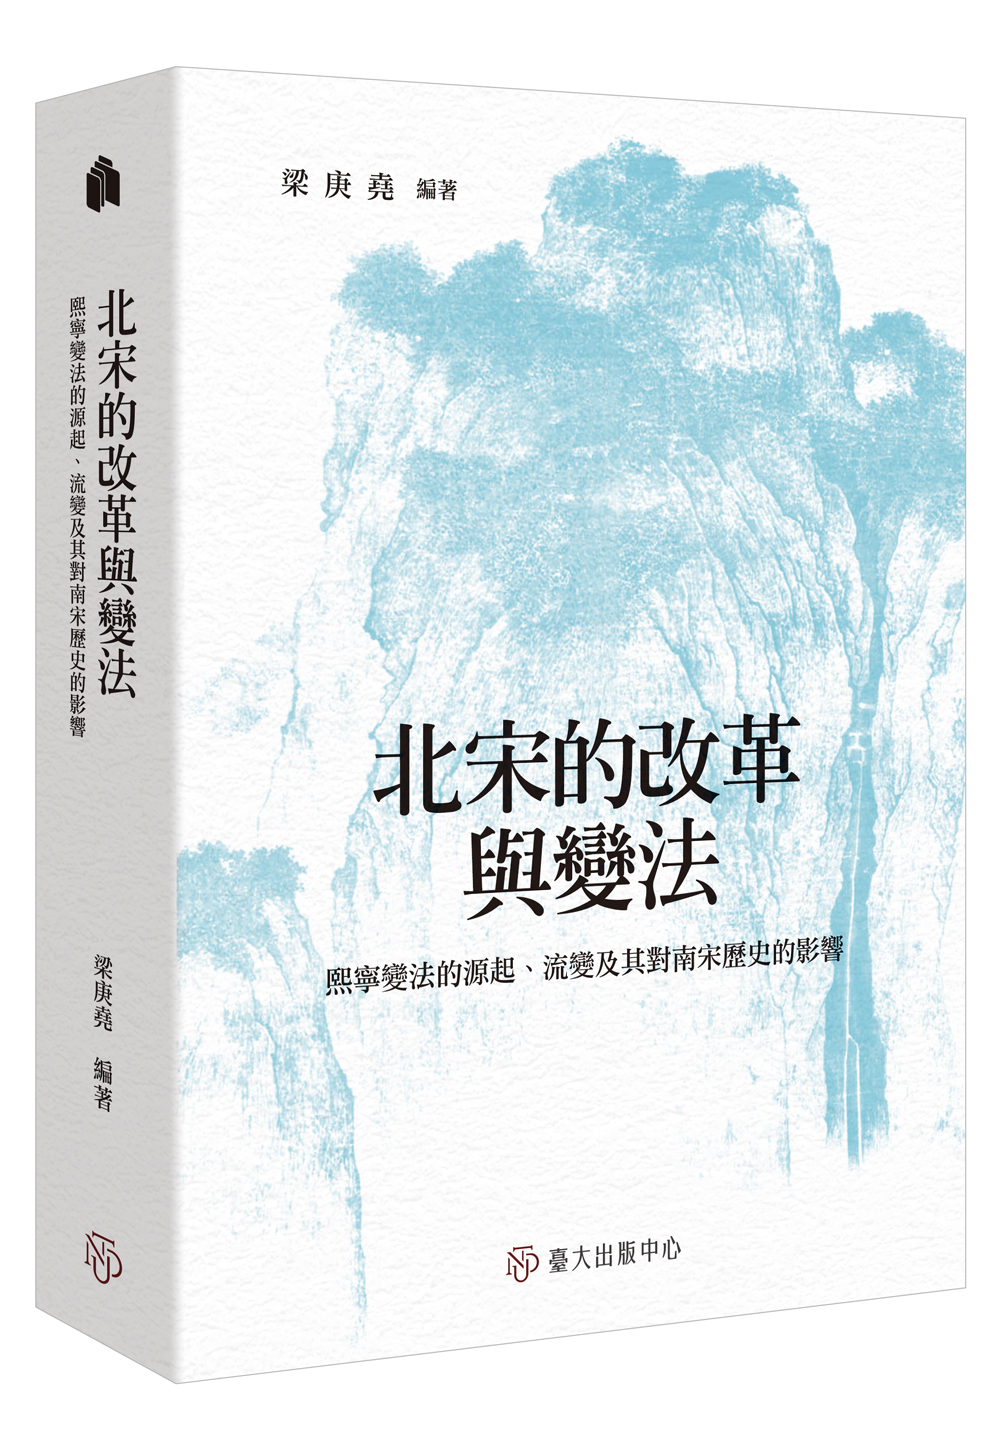 The Qingli Reform and the New Policies in the Northern Song: Origins, Development of the New Policies and its impact on the Southern Song